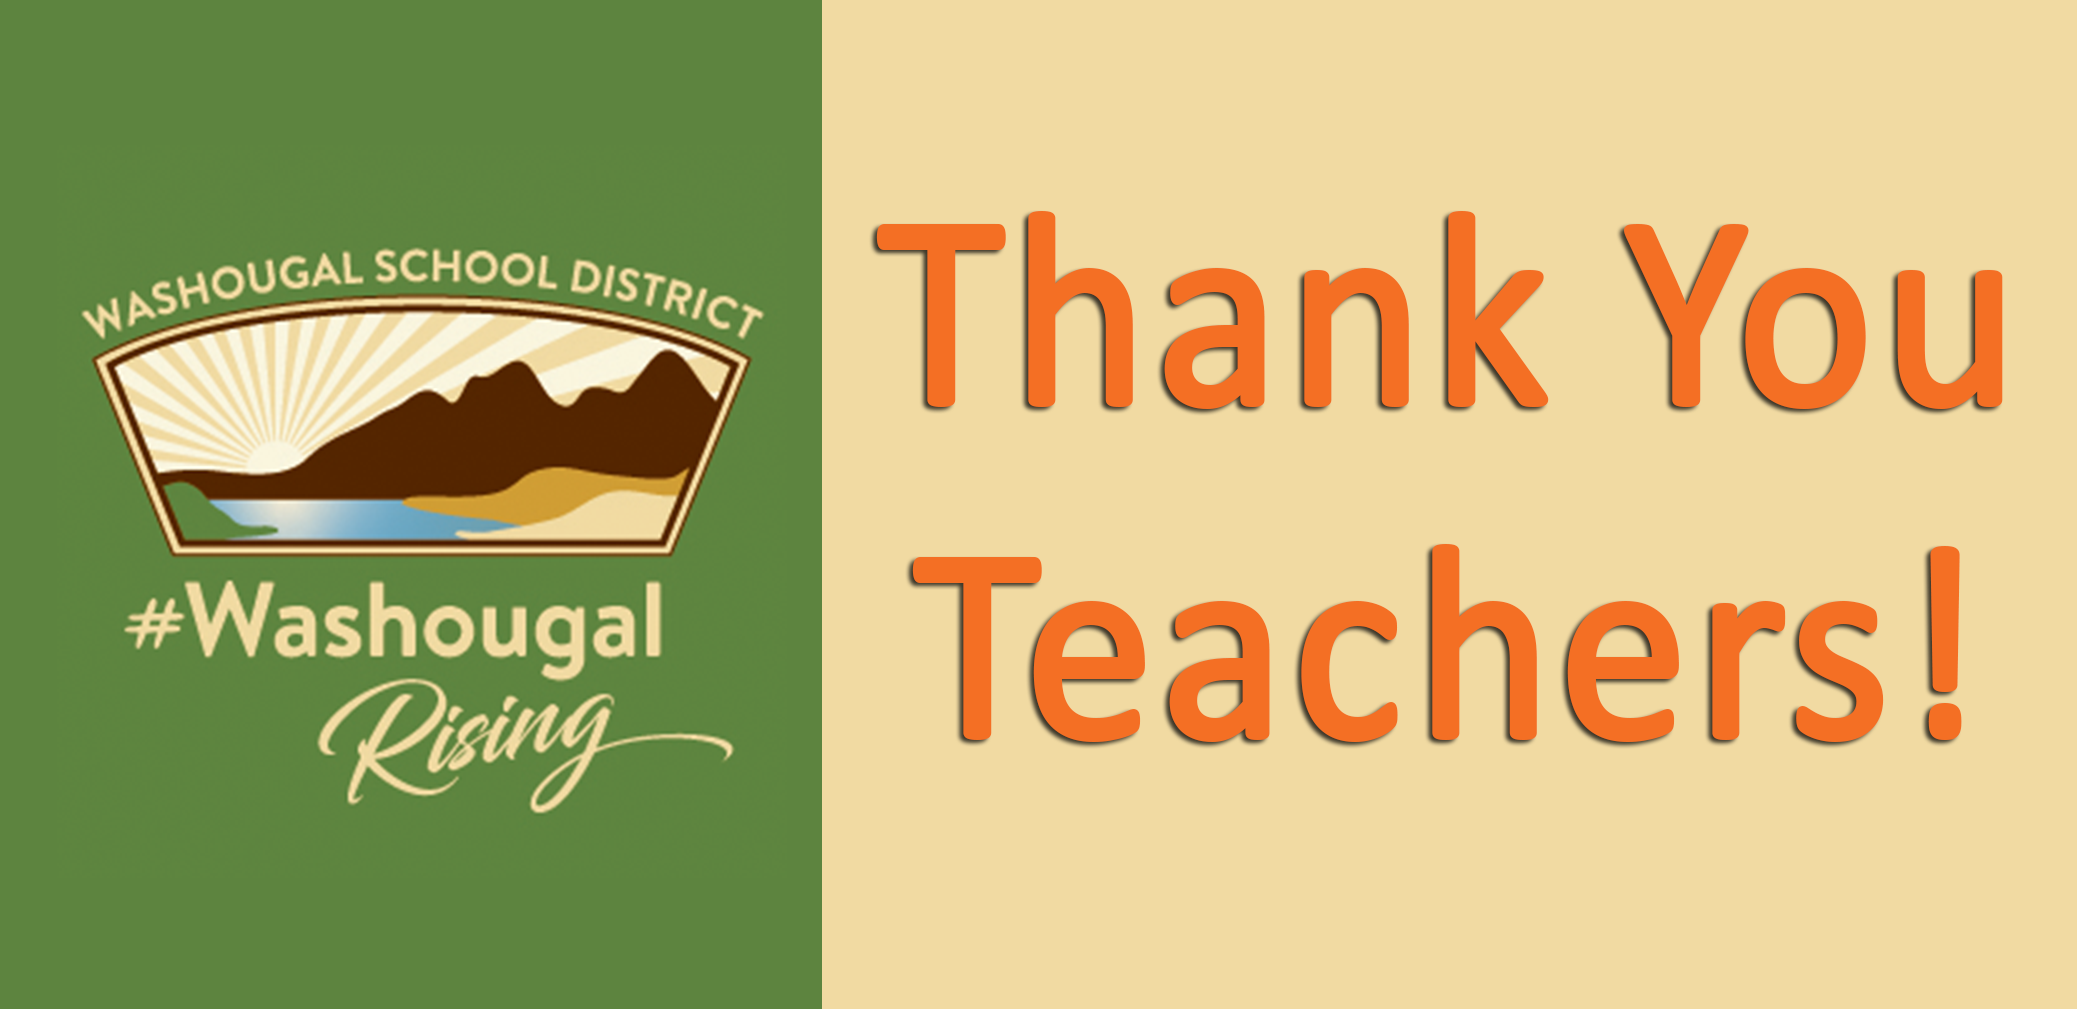 Thank you teachers! with WSD Logo and Washougal School District Washougal Rising